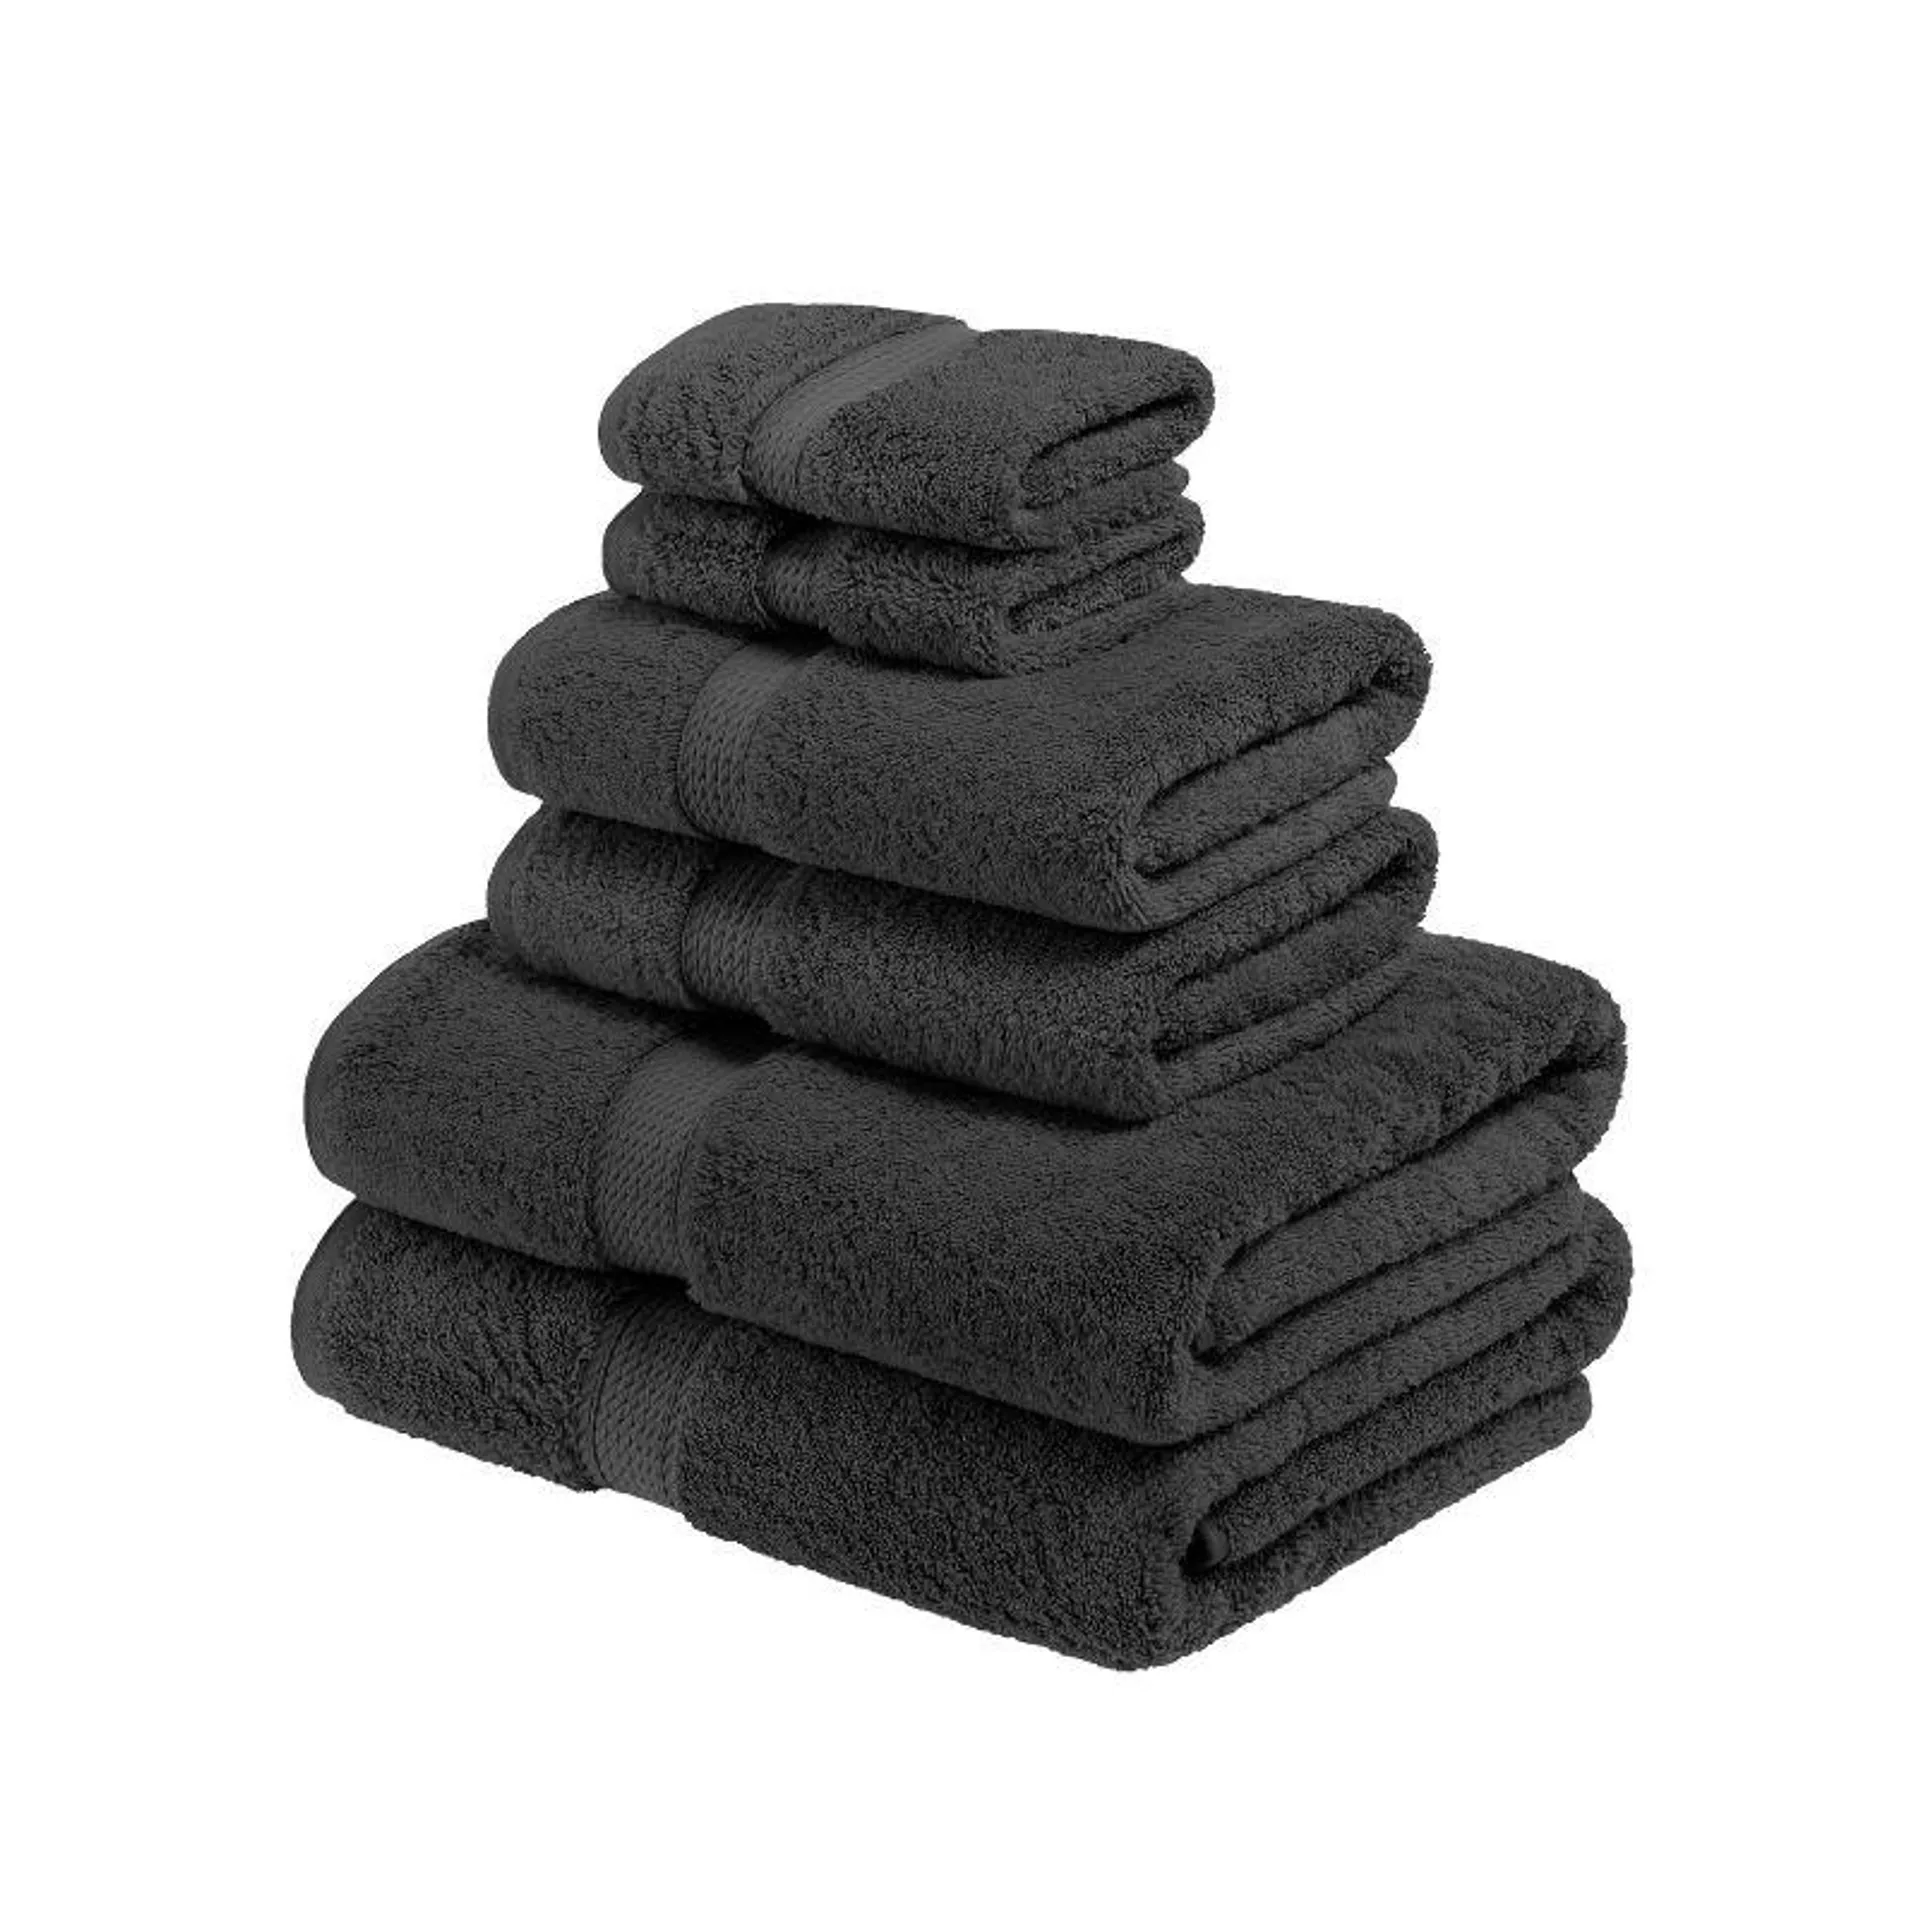 Solid Luxury Premium Cotton 800 GSM Highly Absorbent 6 Piece Bathroom Towel Set by Blue Nile Mills